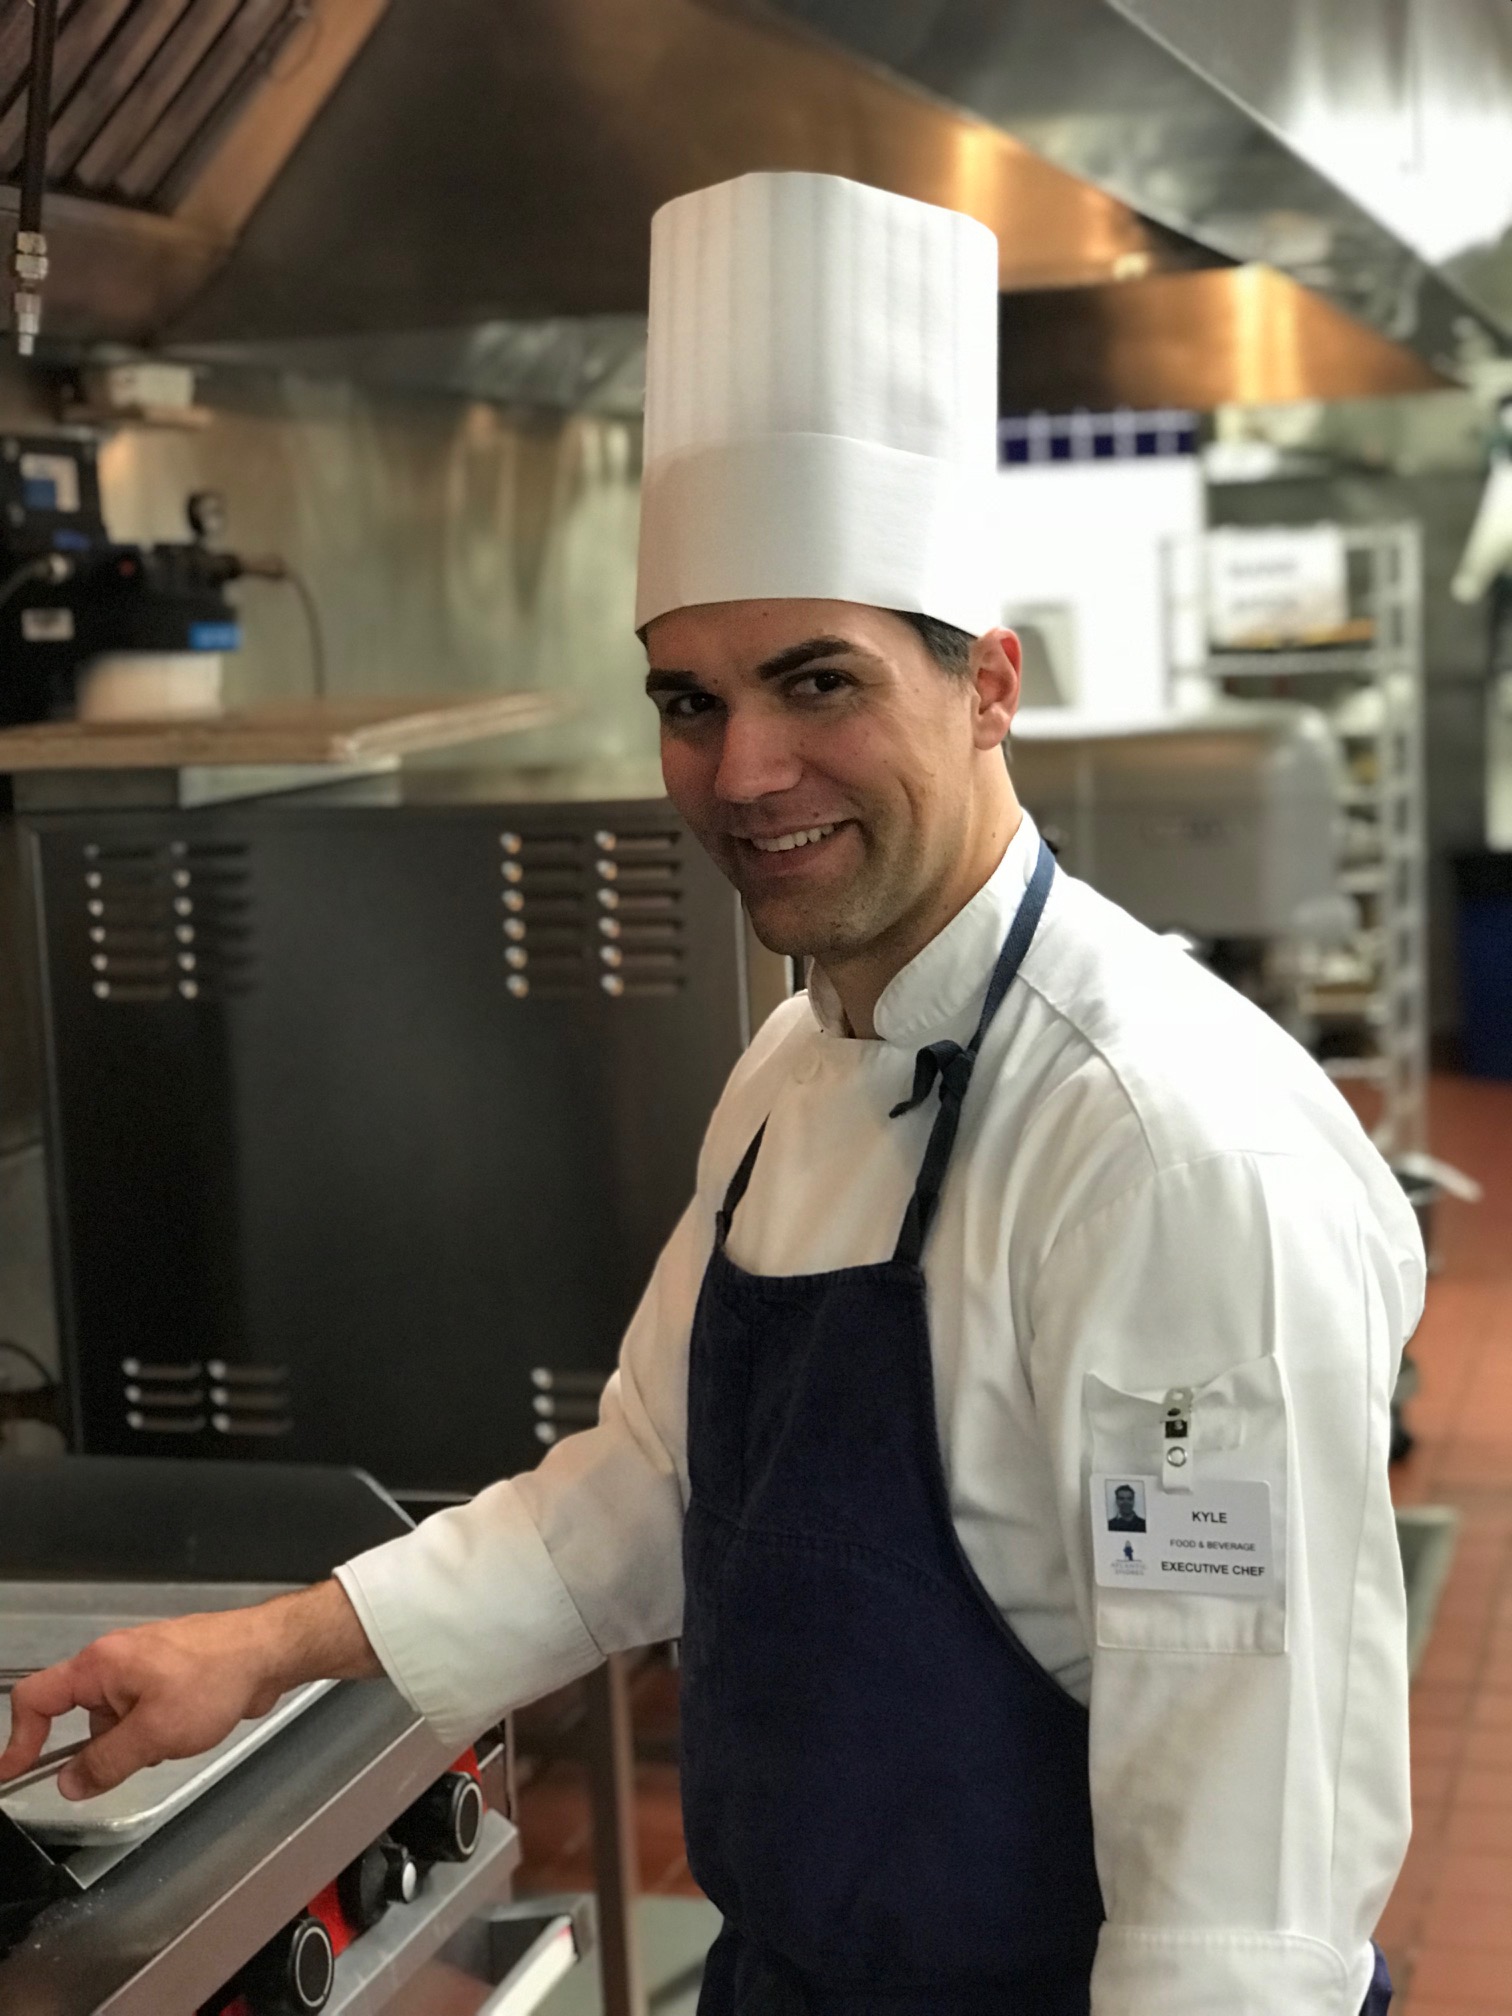 Atlantic Shores Adds A Fresh Twist To Cuisine With New Executive Chef